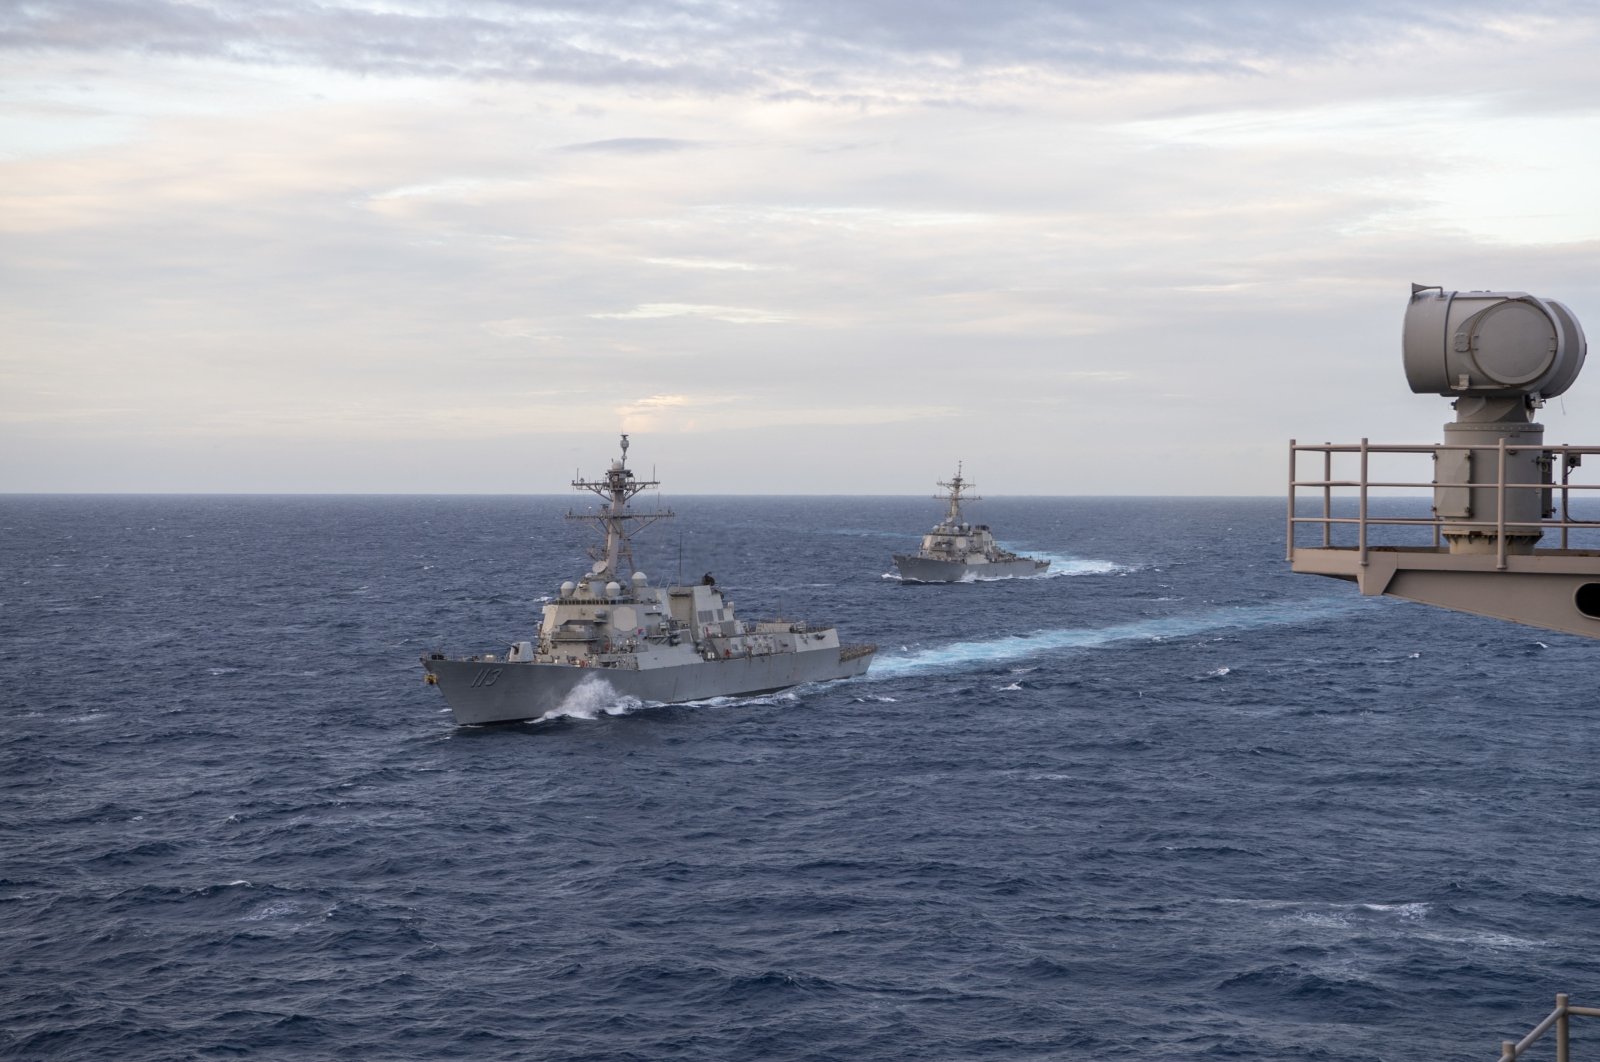 The Arleigh Burke-class guided-missile destroyer USS John Finn (DDG 113) (L) and the Arleigh Burke-class guided-missile destroyer USS Russell (DDG 59) move into formation alongside the aircraft carrier USS Theodore Roosevelt (CVN 71) during dual-carrier operations with the Nimitz Carrier Strike Group in the South China Sea, Feb. 9, 2021. (Reuters Photo)